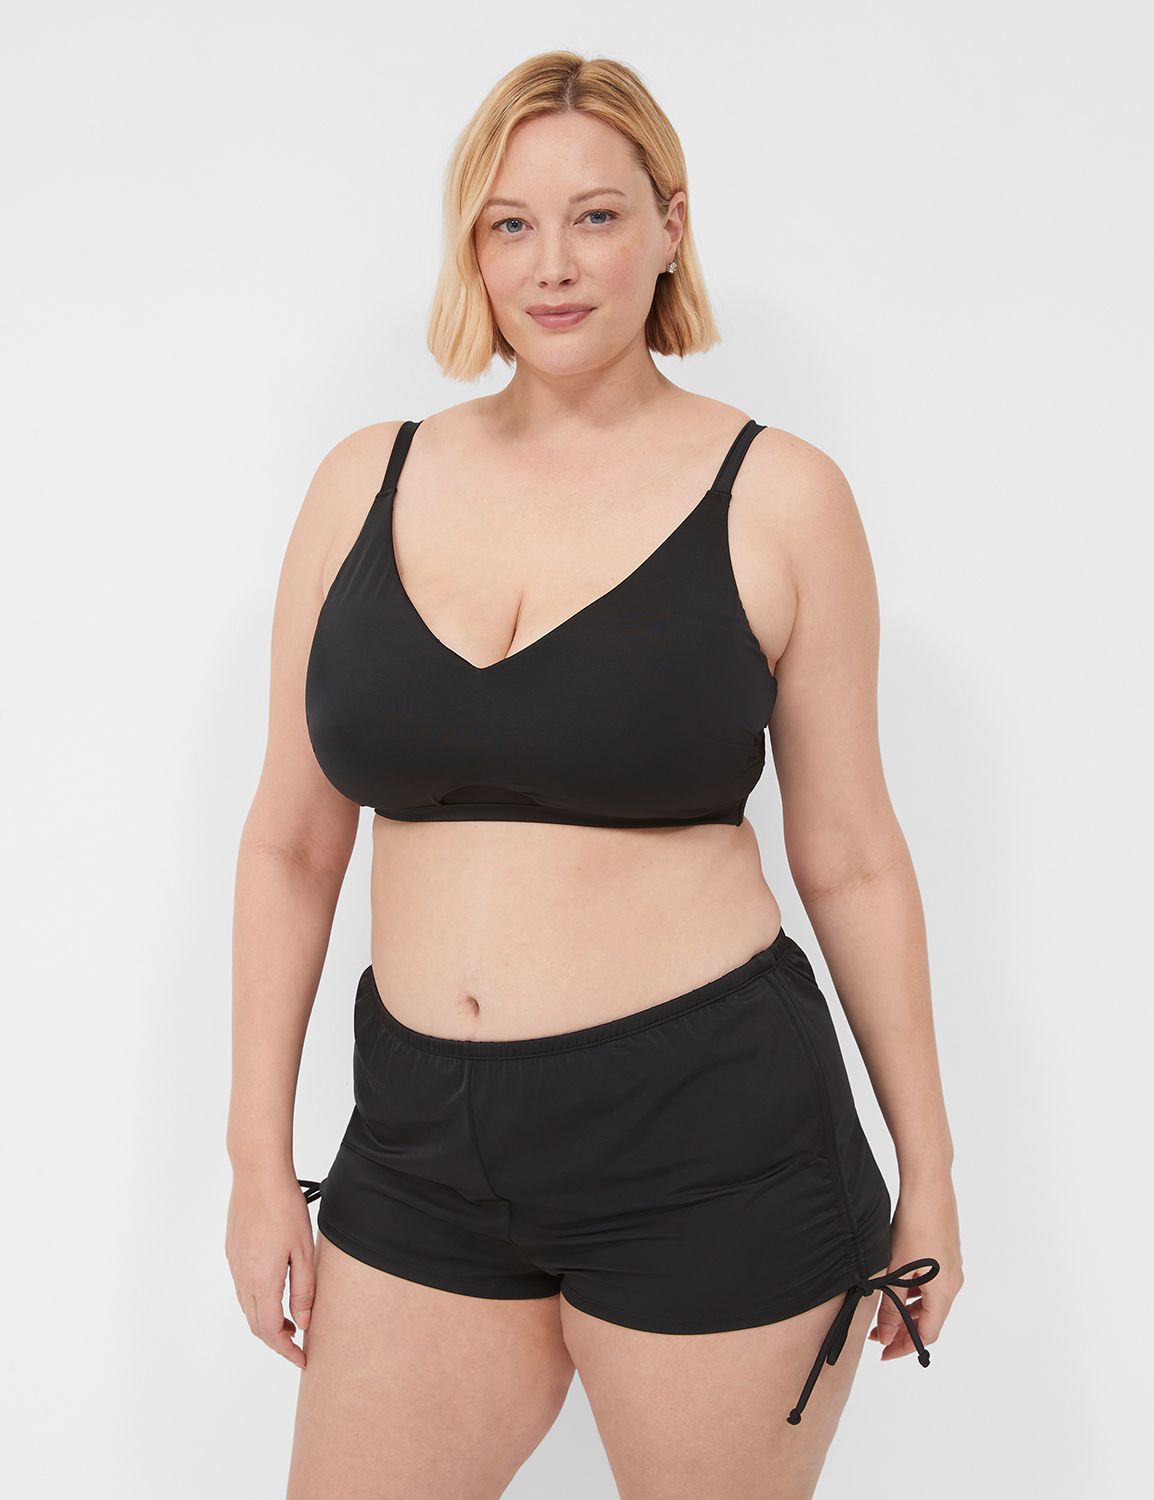 Cacique NWT Plus Size Black Swim Bottoms Size 20 - $17 New With Tags - From  MCI